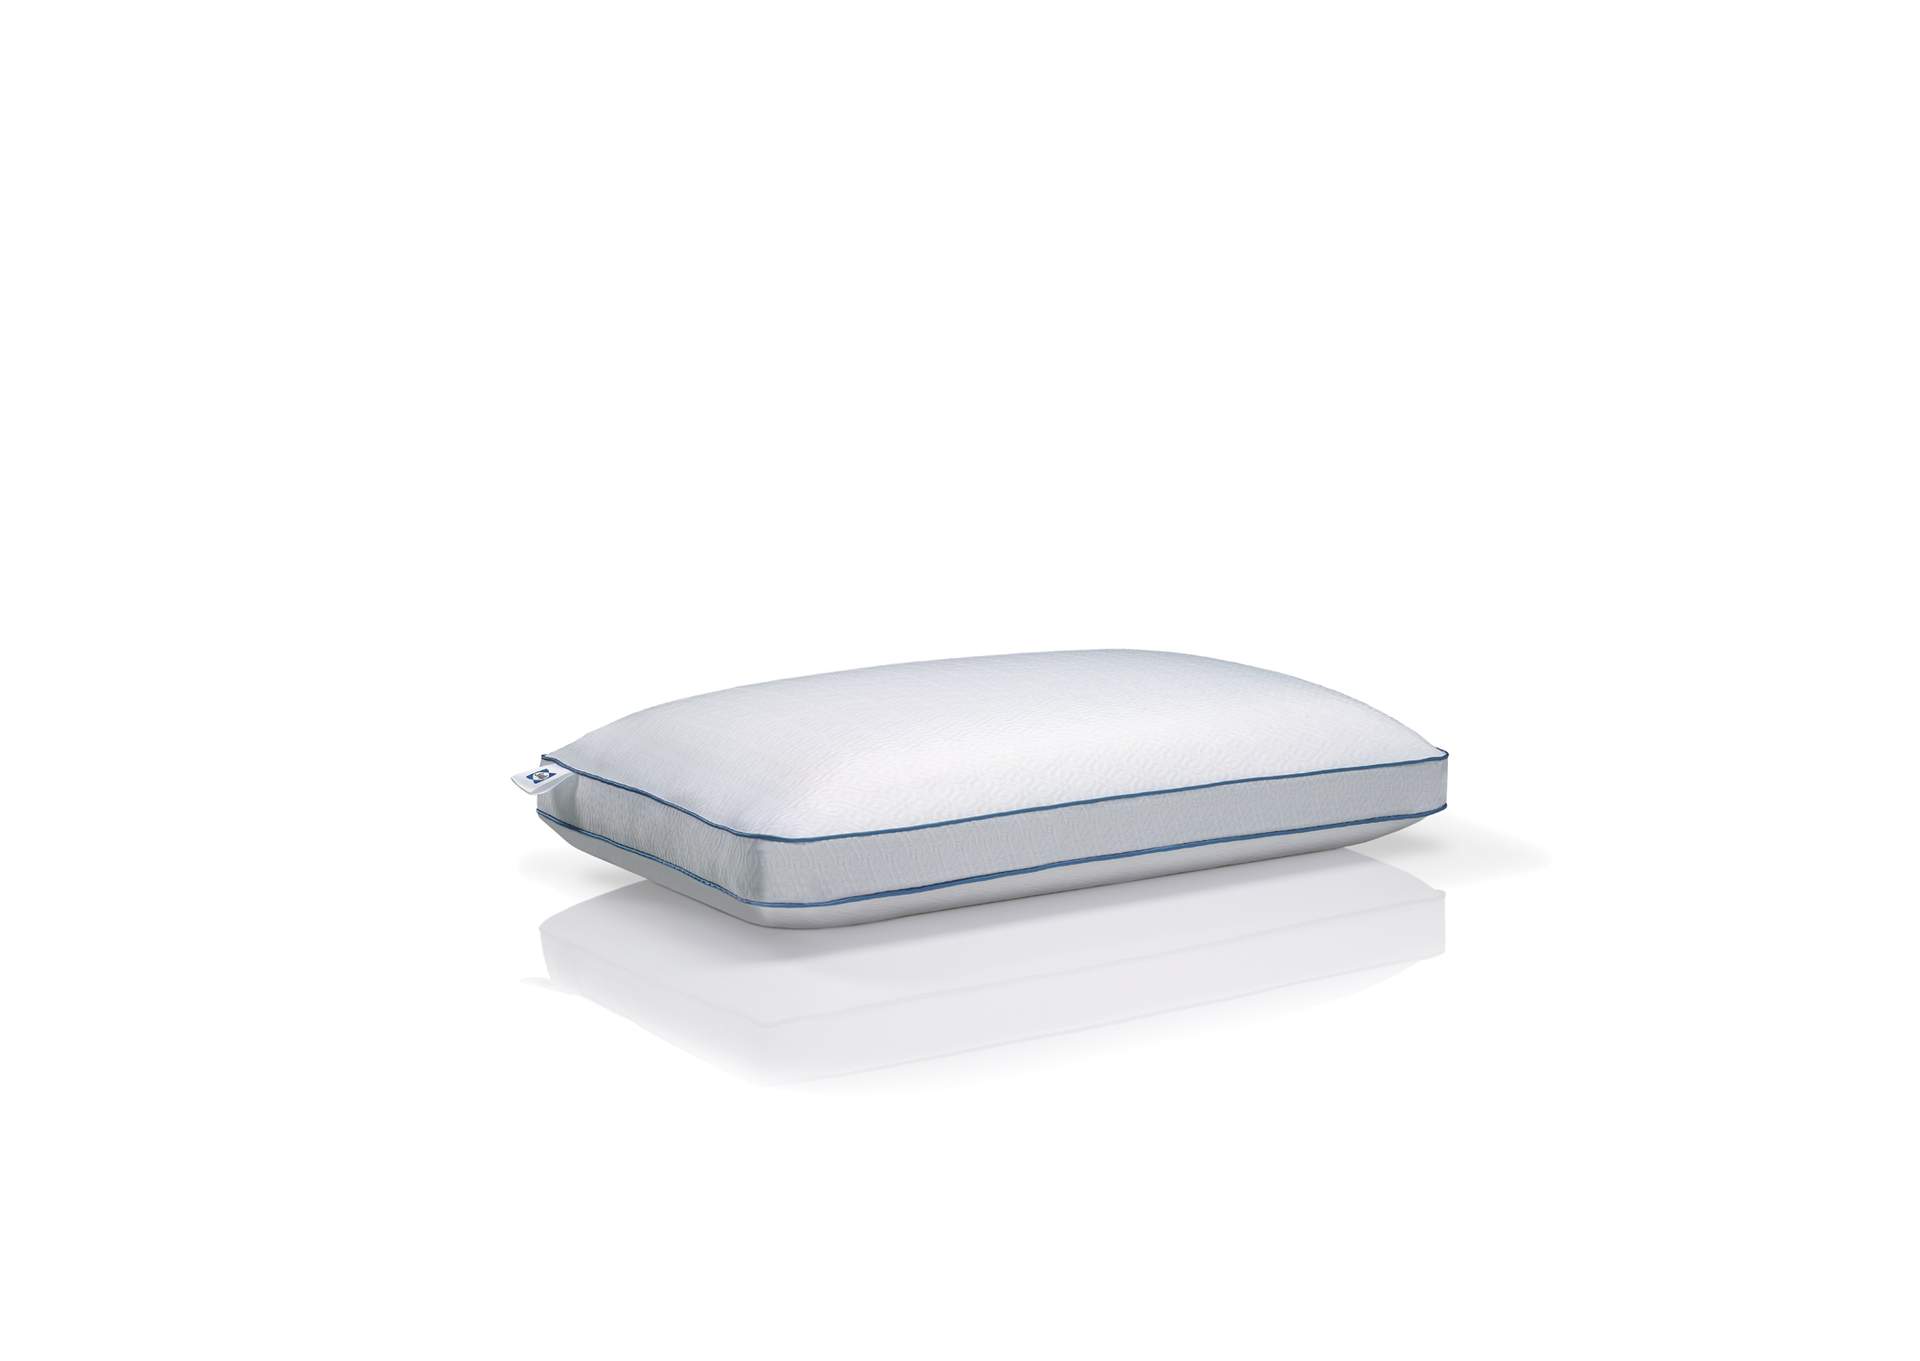 Sealy&Reg; Response Cooling Memory Foam And Support Gel Bed Pillow Standard,Sealy